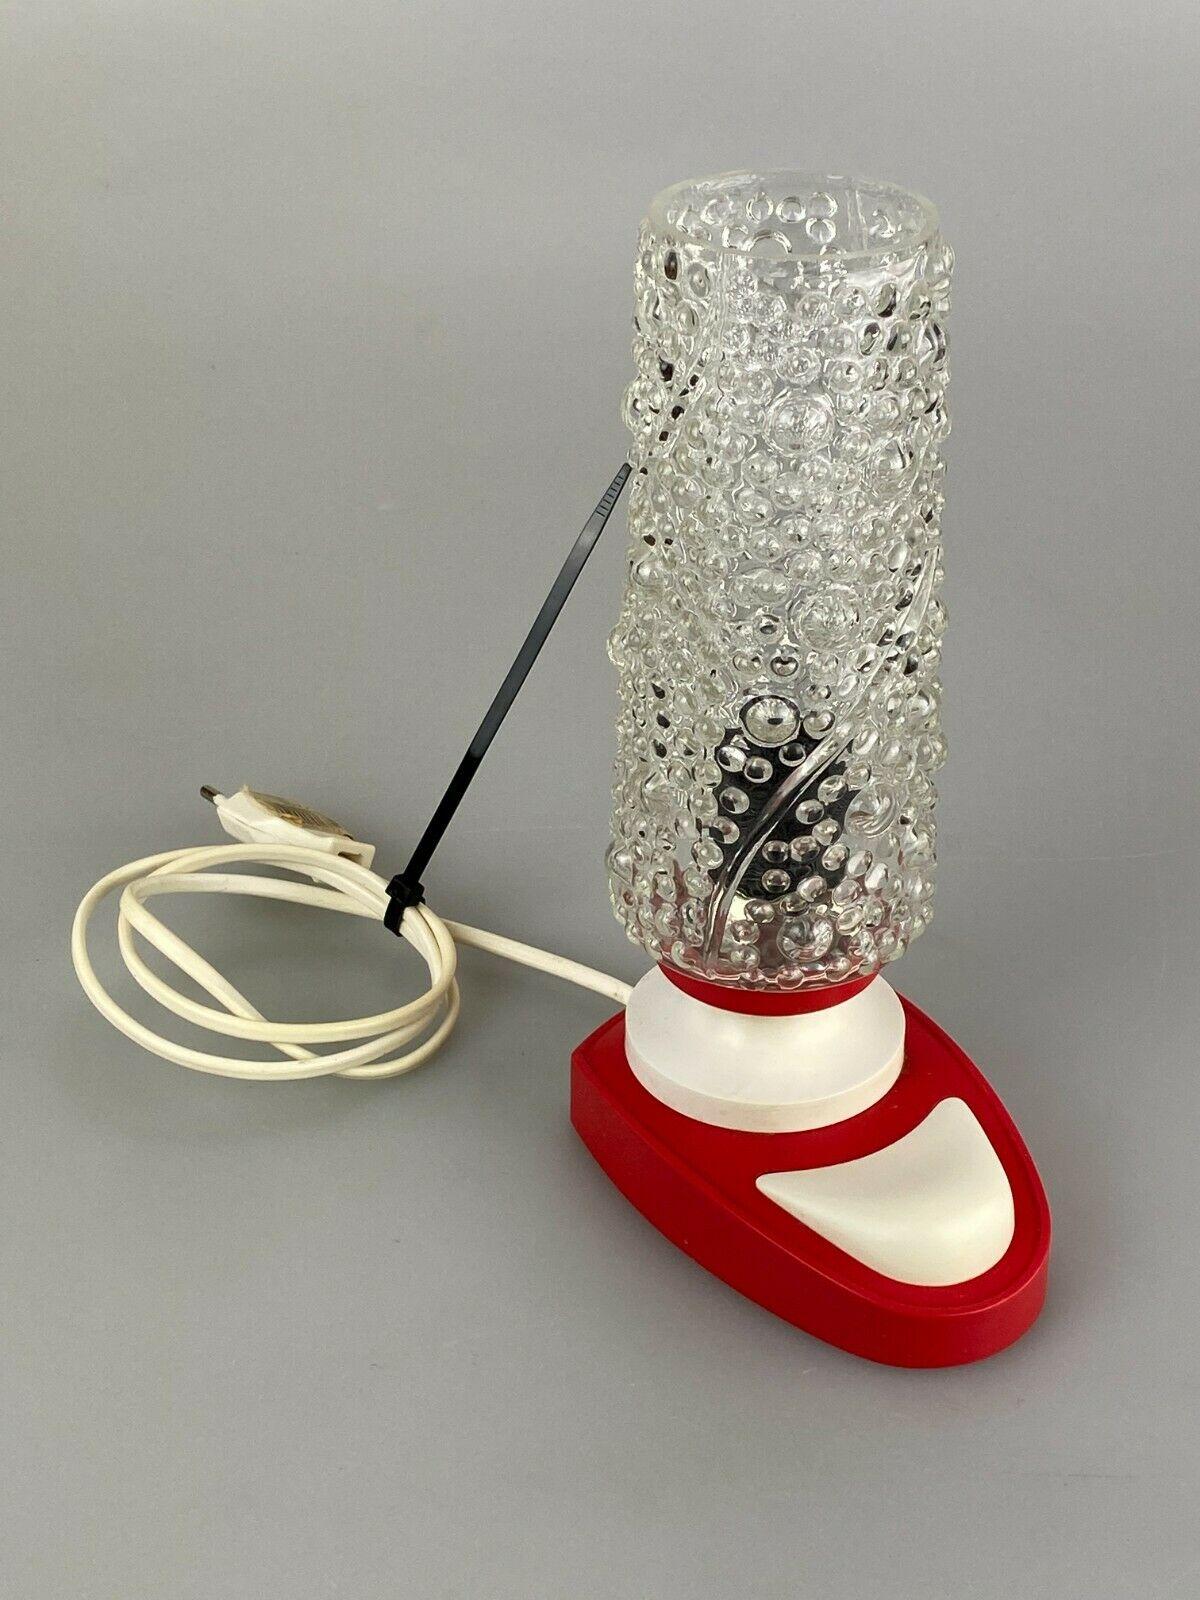 60s 70s Lamp Bubble Light Table Lamp Bedside Lamp Space Age Design For Sale 6